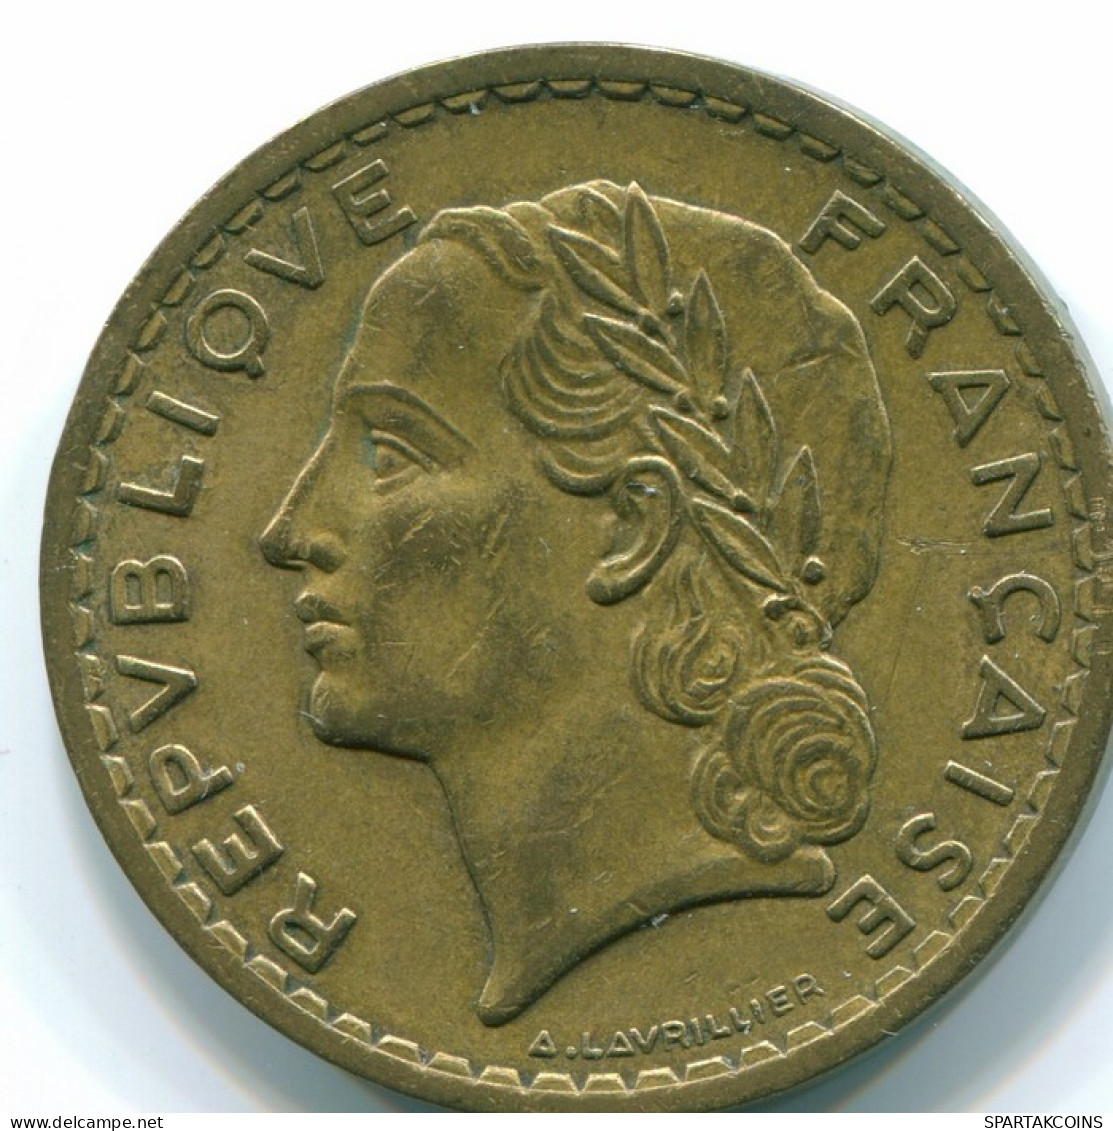 5 FRANCS 1945 FRANCE Coin COLONIAL FOR USE IN AFRICA Lavrillier VF+ #FR1019.29 - 5 Francs